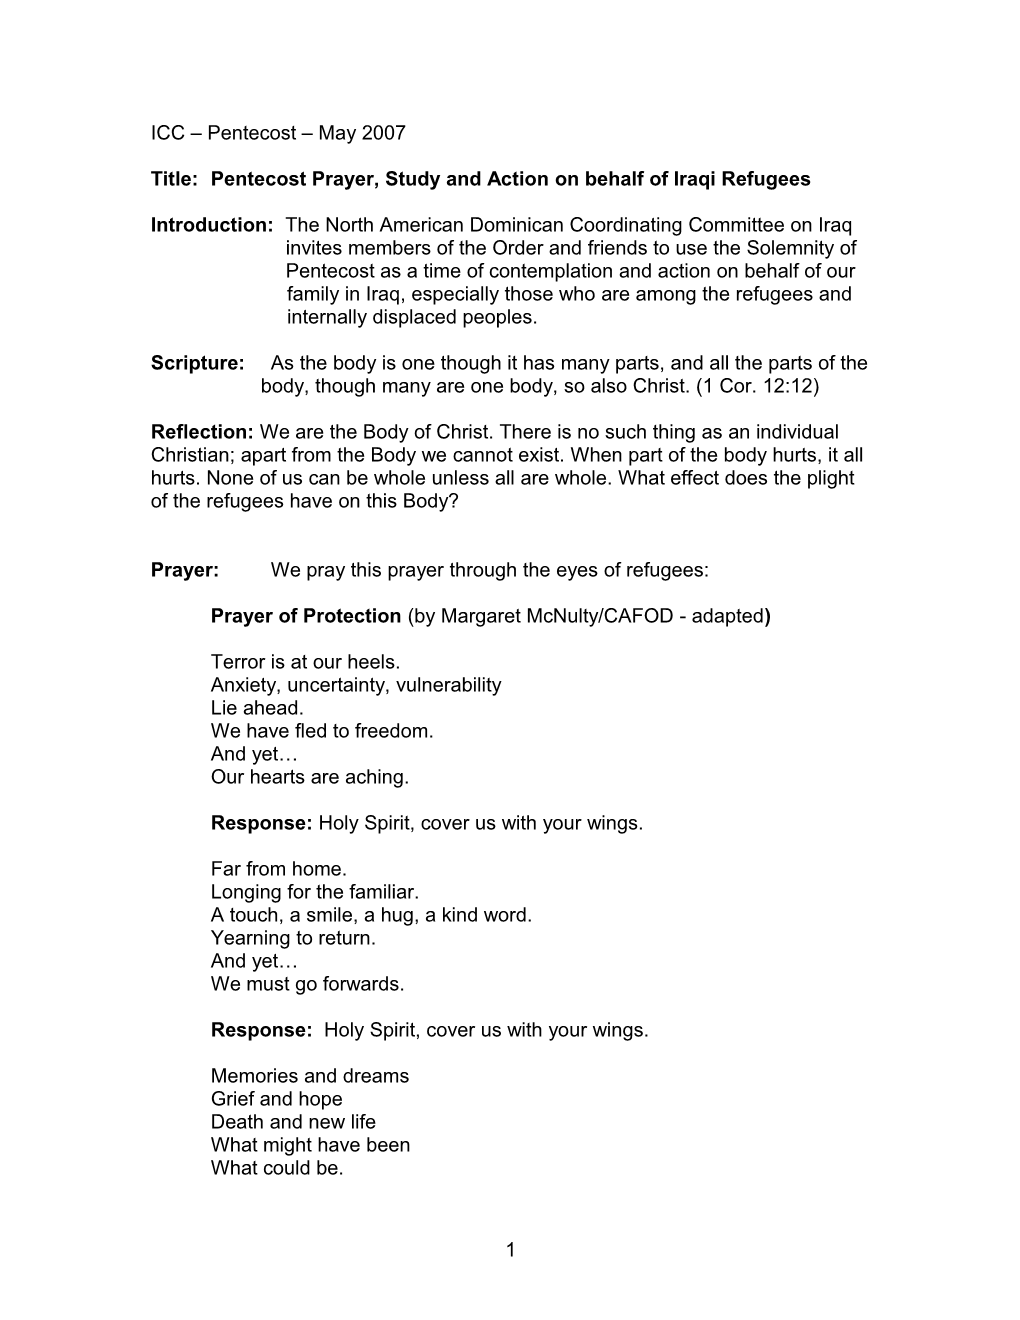 Title: Pentecost Prayer, Study and Action on Behalf of Iraqi Refugees